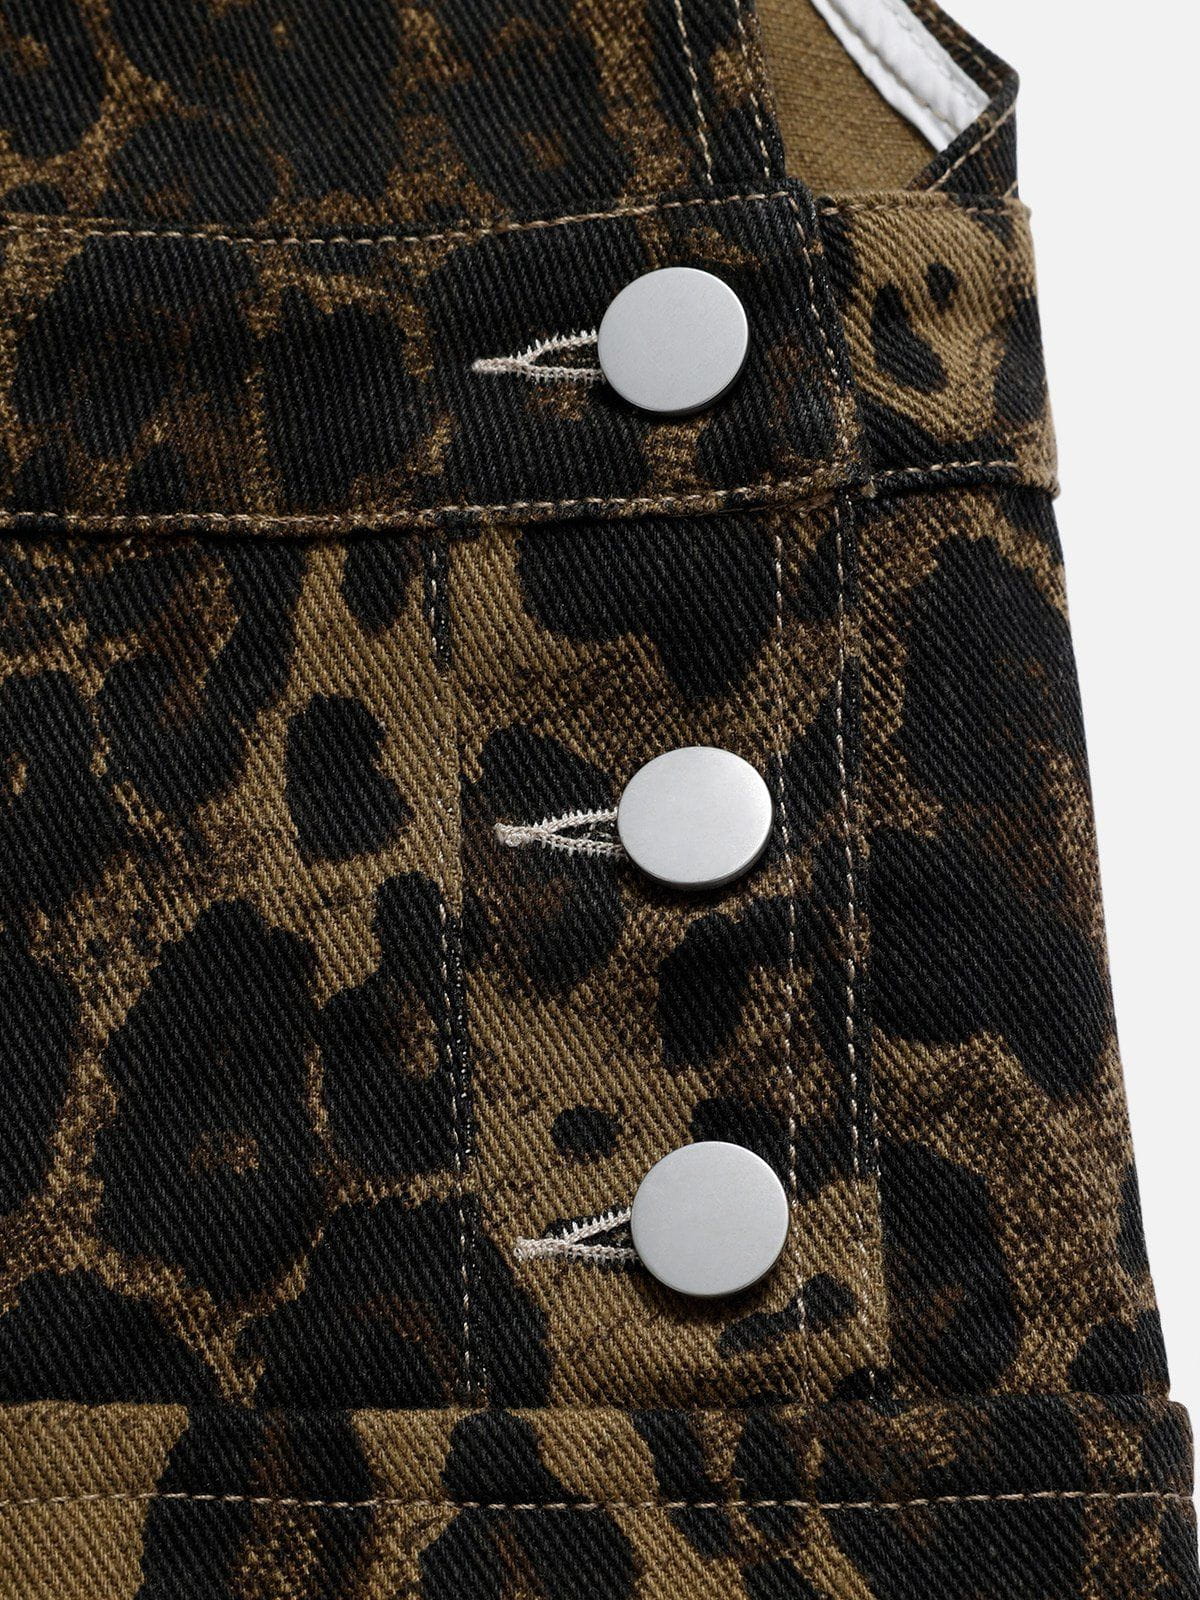 [Pre-Order] Aelfric Eden Leopard Print Overall Shorts